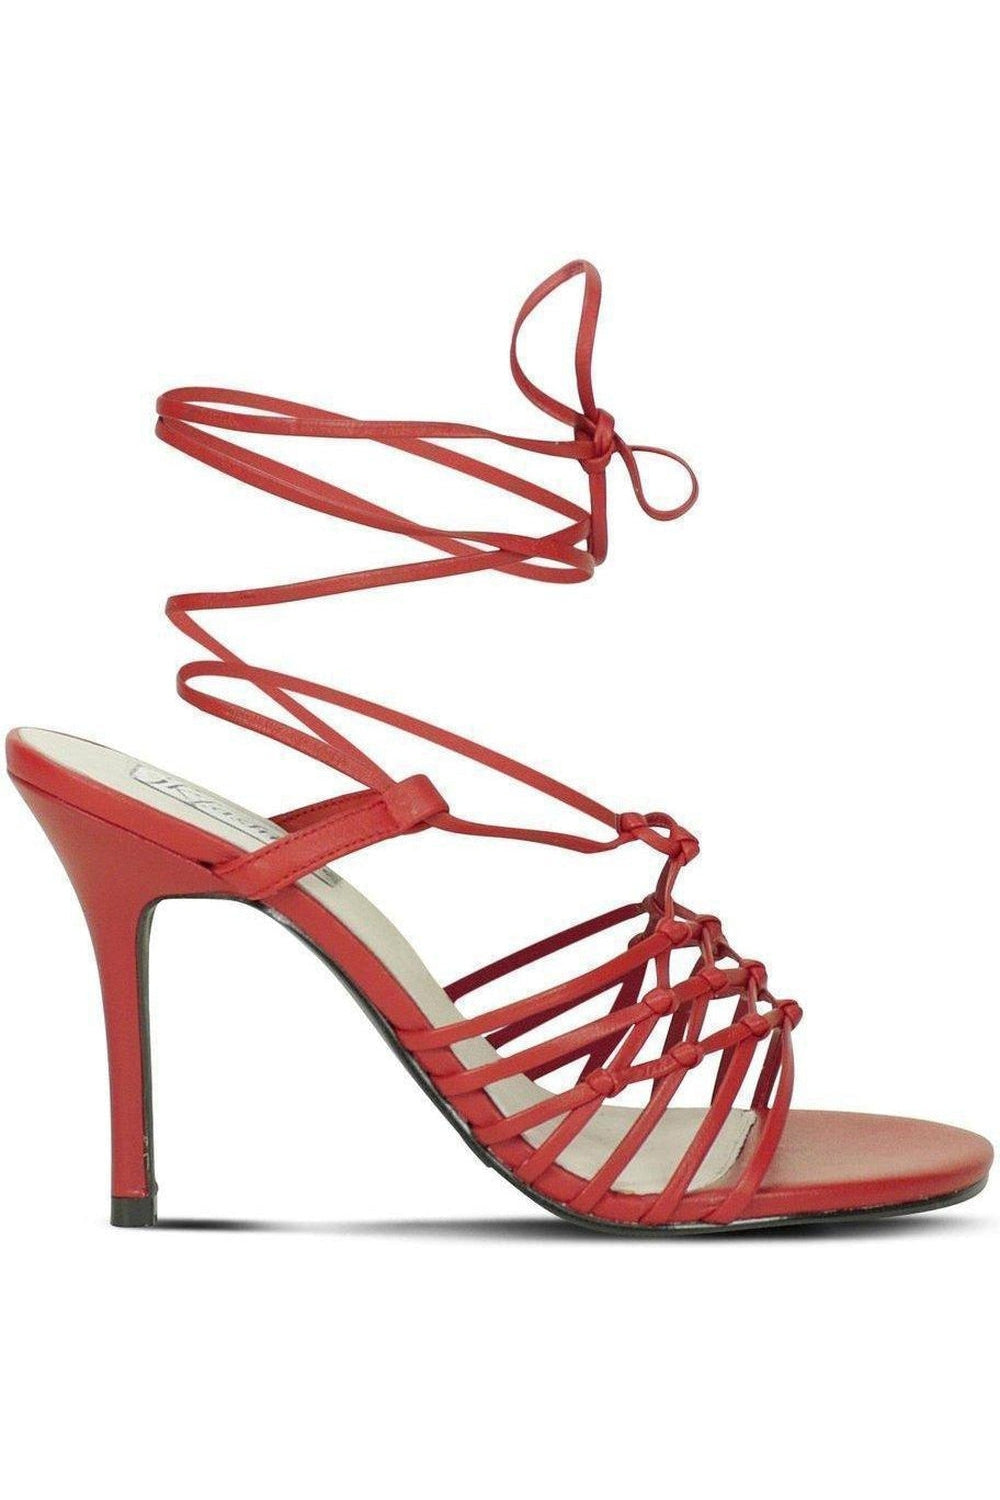 Sexy-9721 Strappy Leg Wrap Sandal | Red Leather-Sexyshoes Brand-Sandals-SEXYSHOES.COM